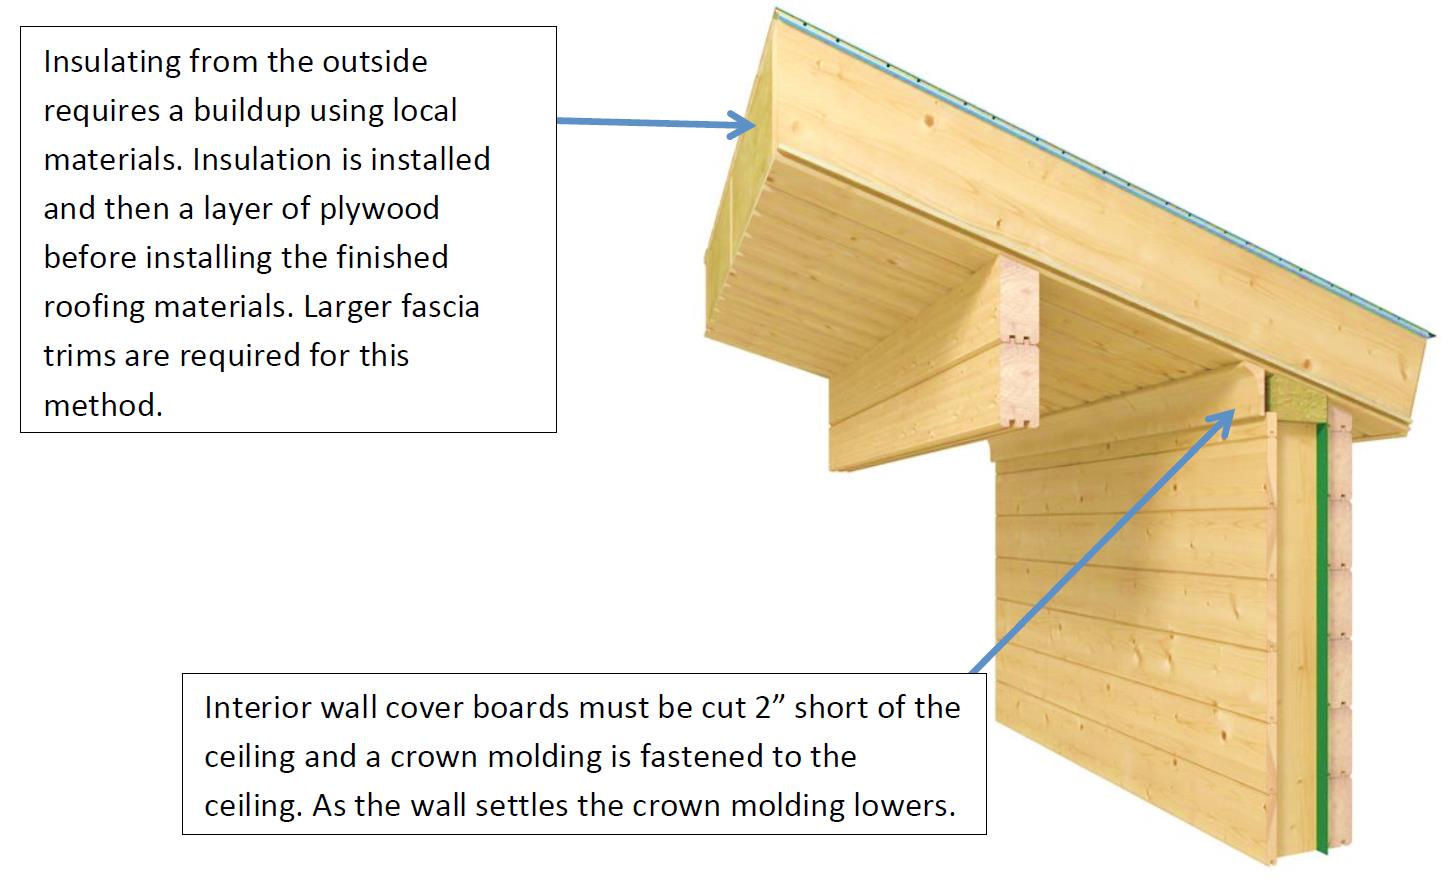 Insulating Ceilings - Option 2. Insulating from the outside requires a buildup using local materials. Insulation is installed and then a layer of plywood before instaling the finished roofing materials. Larger fascia trims are required for this method. Interiorwall cover boards must be cut two inches short of the ceiling and crown molding is fastened to the ceiling. As the wall settles the crown molding lowers. Do it yourself building kits. EZ Log Structures.